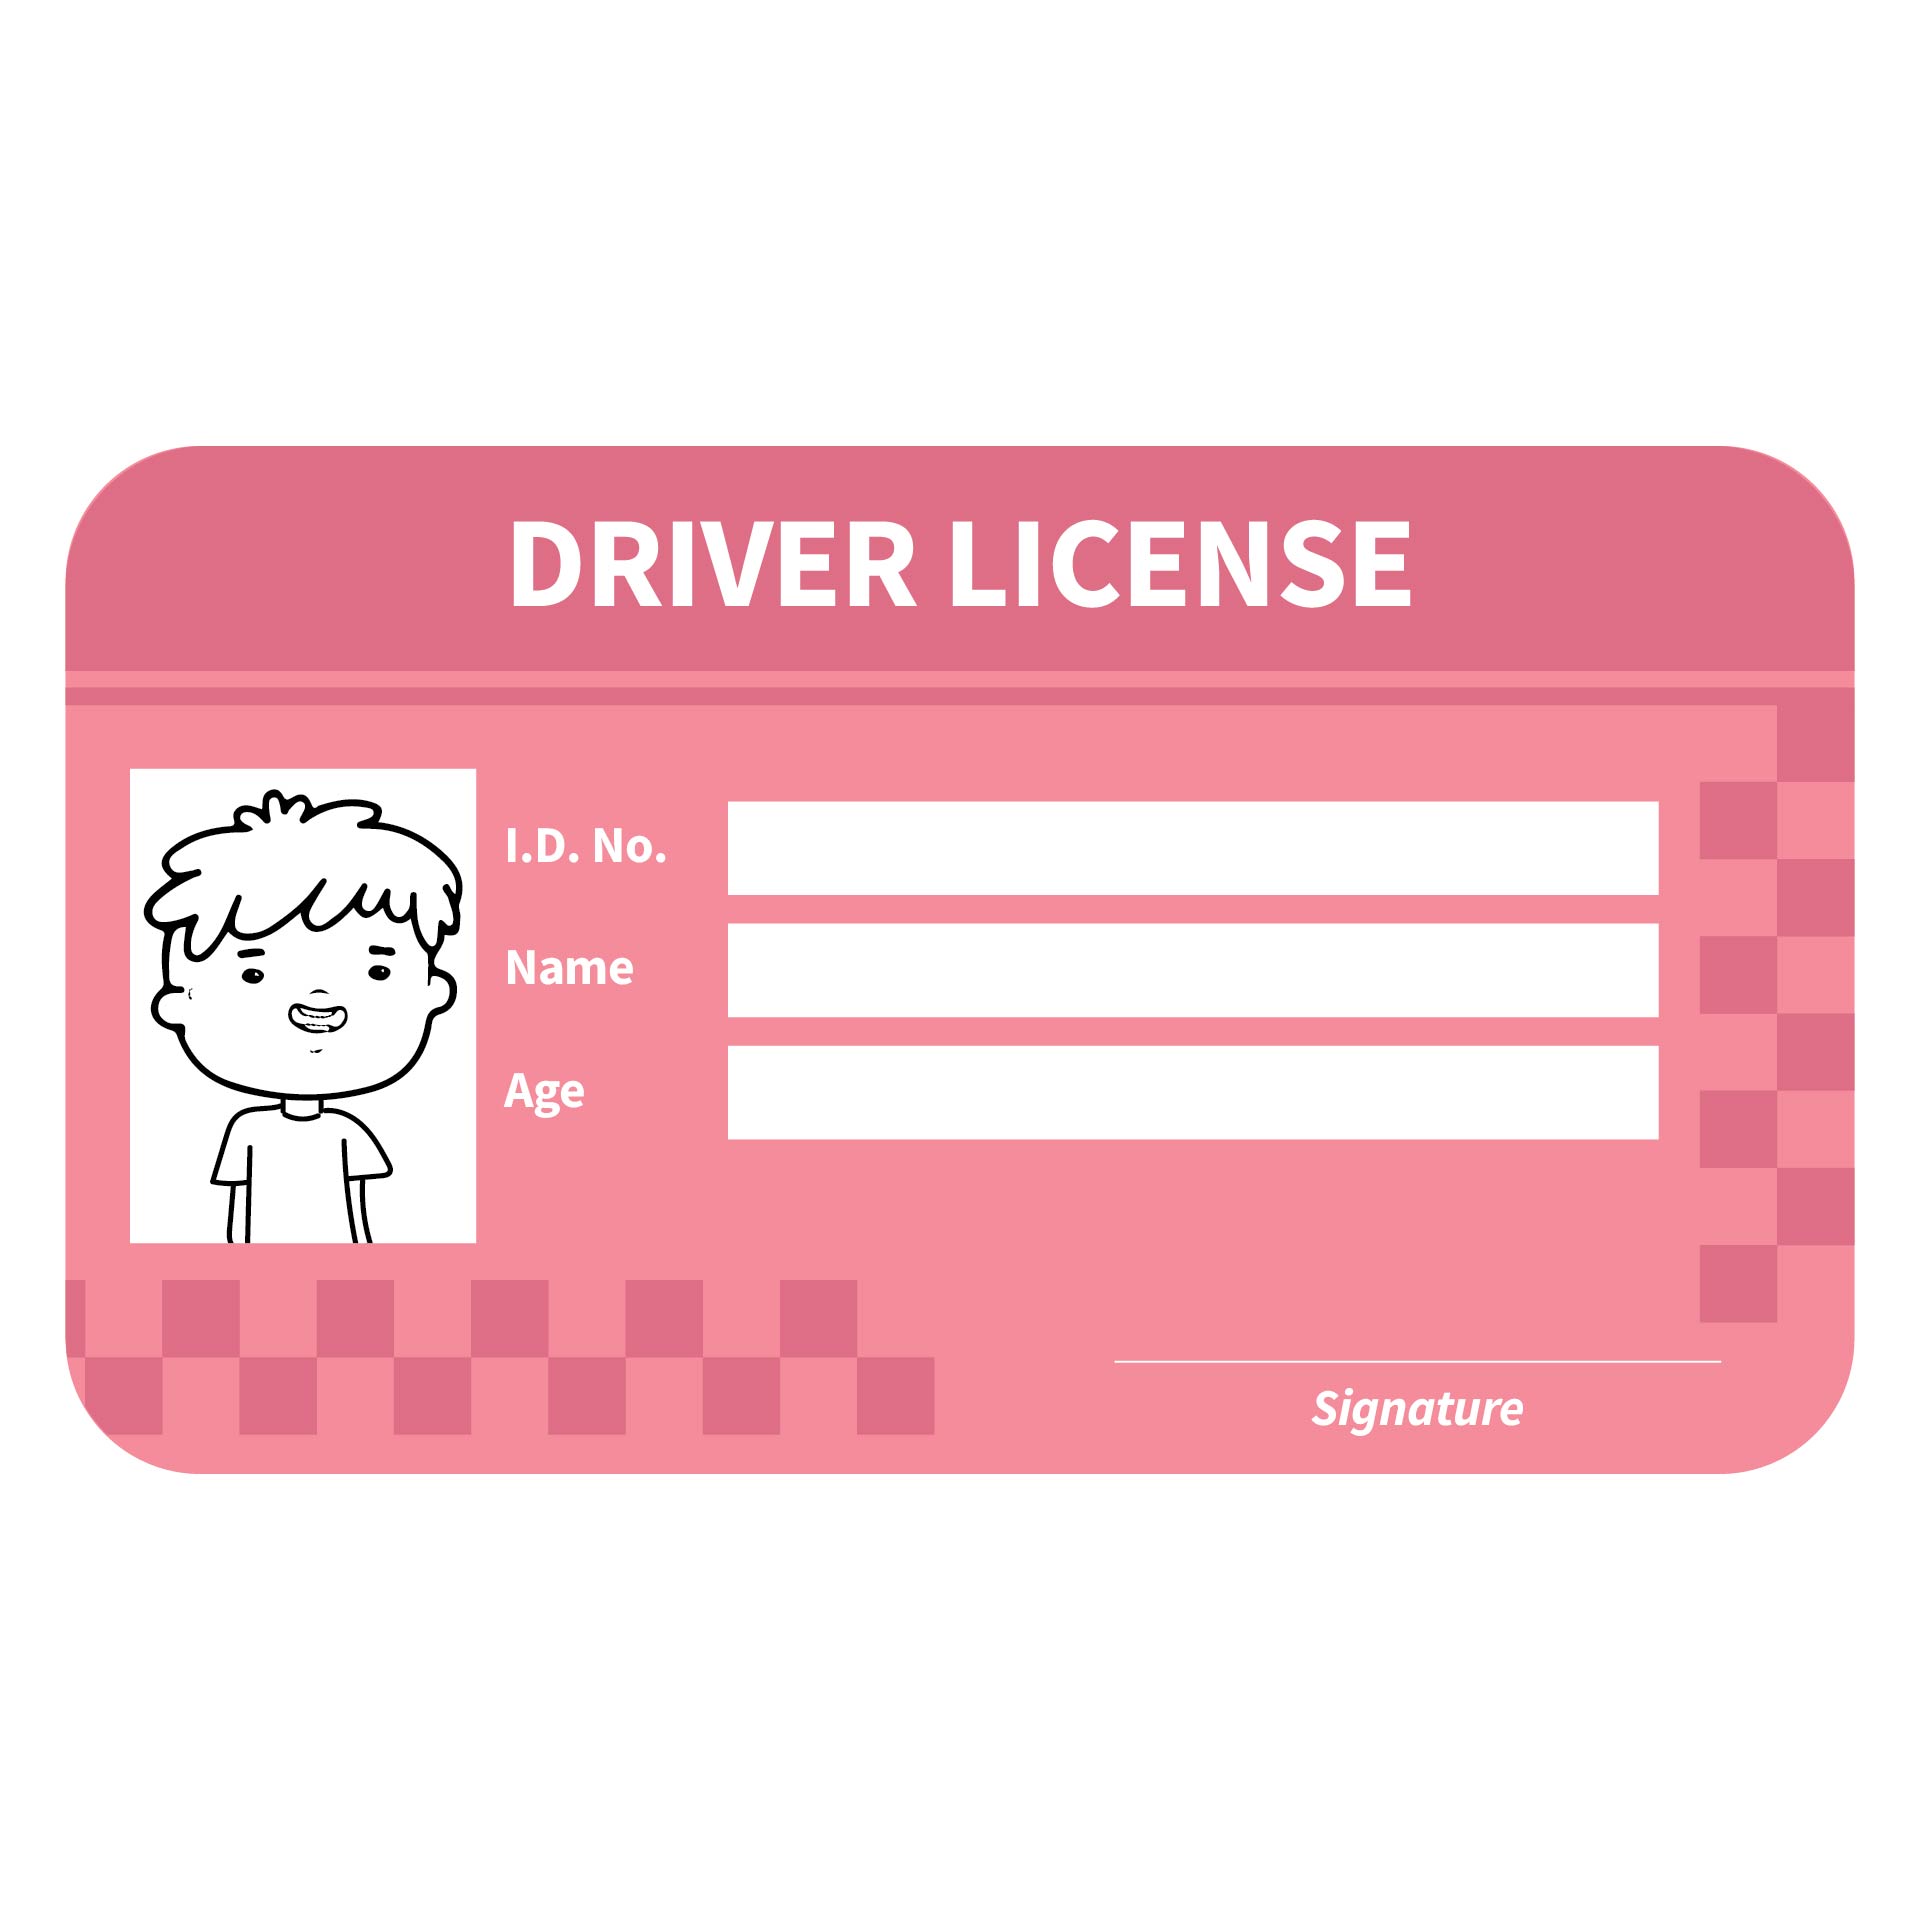 21 Best Drivers License Printable Template - printablee.com Throughout Blank Drivers License Template